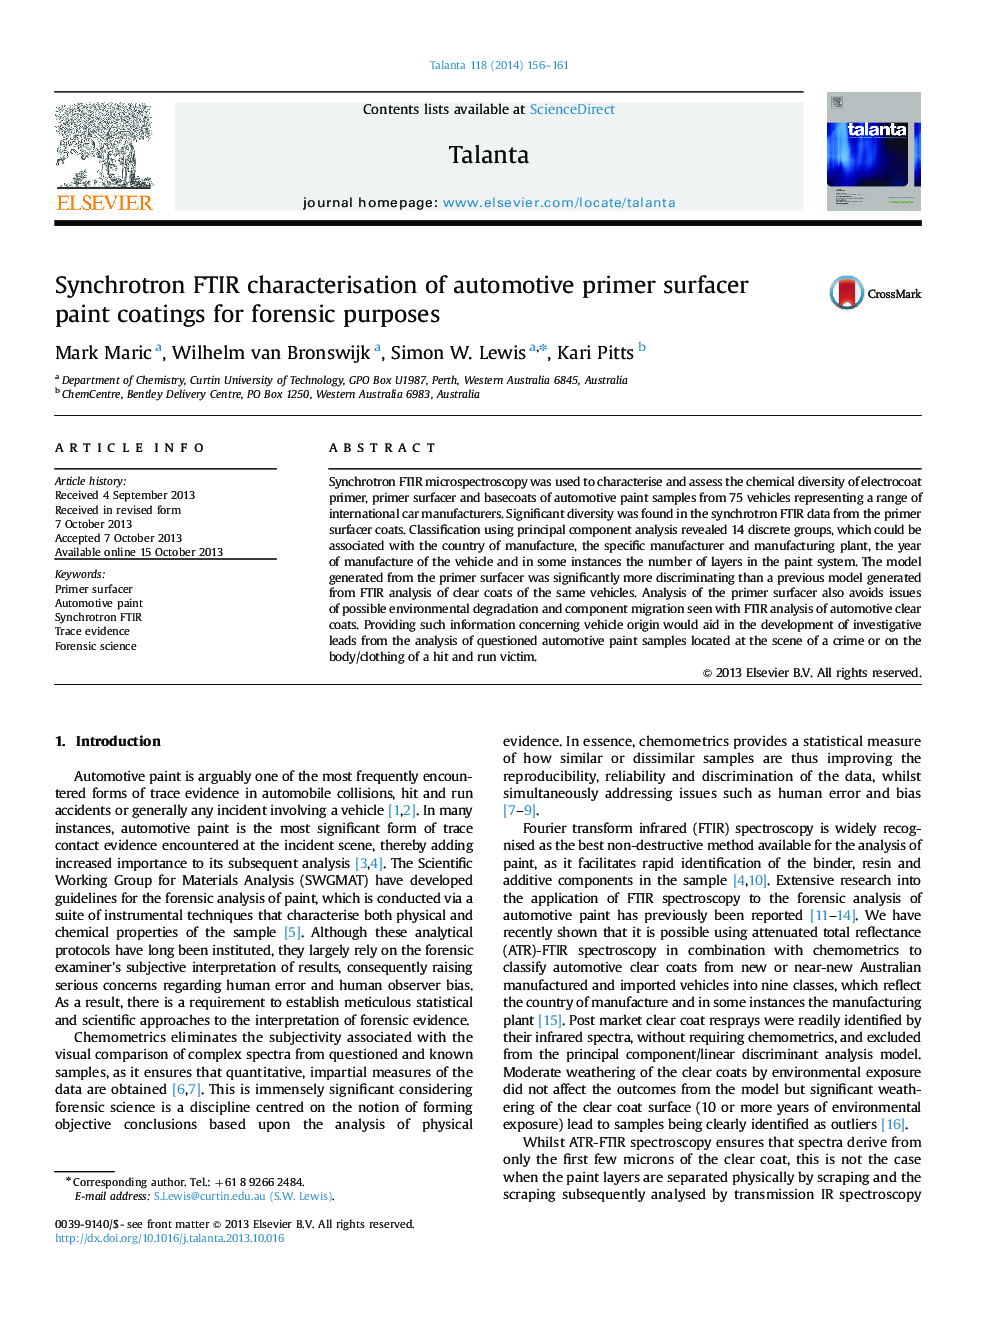 Synchrotron FTIR characterisation of automotive primer surfacer paint coatings for forensic purposes